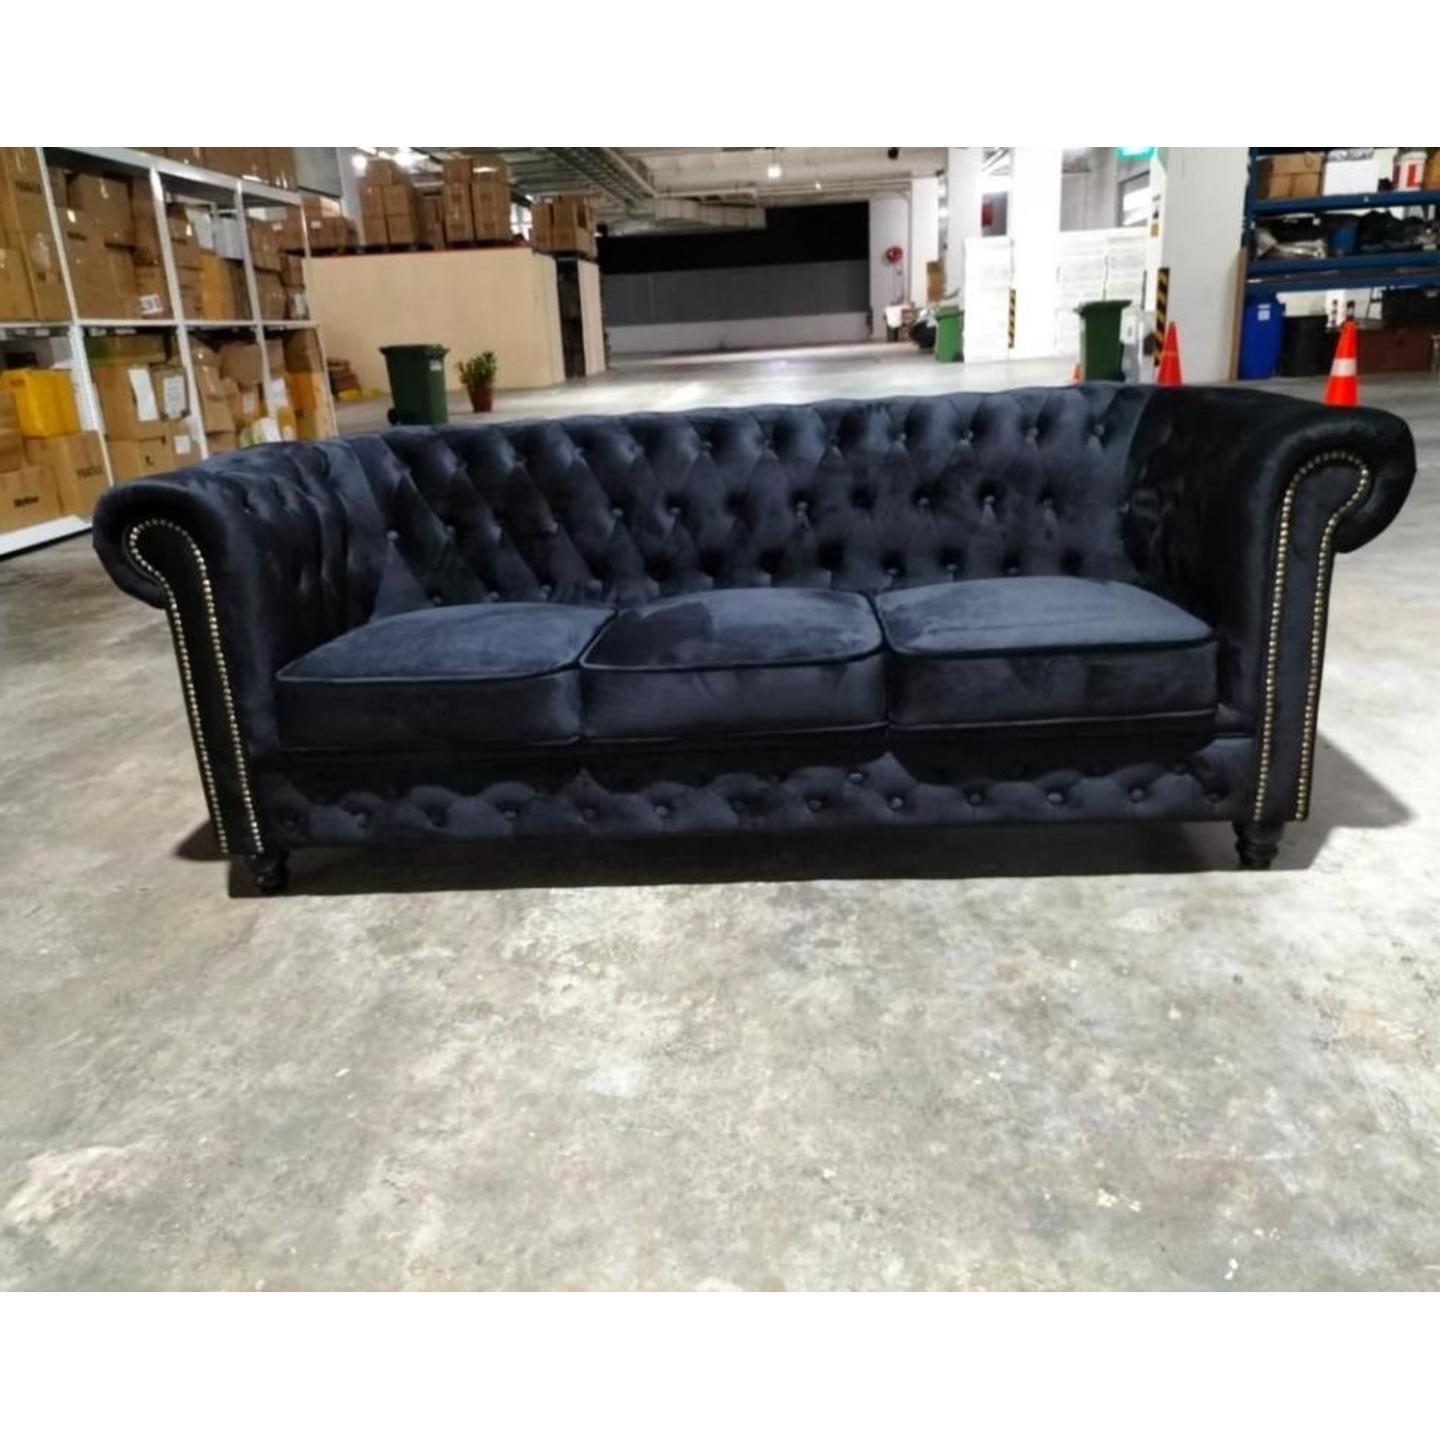 (PRE ORDER) SALVADORE X 3 Seater Chesterfield Sofa in Velvet Black - Estimated Delivery by End Apr 2023